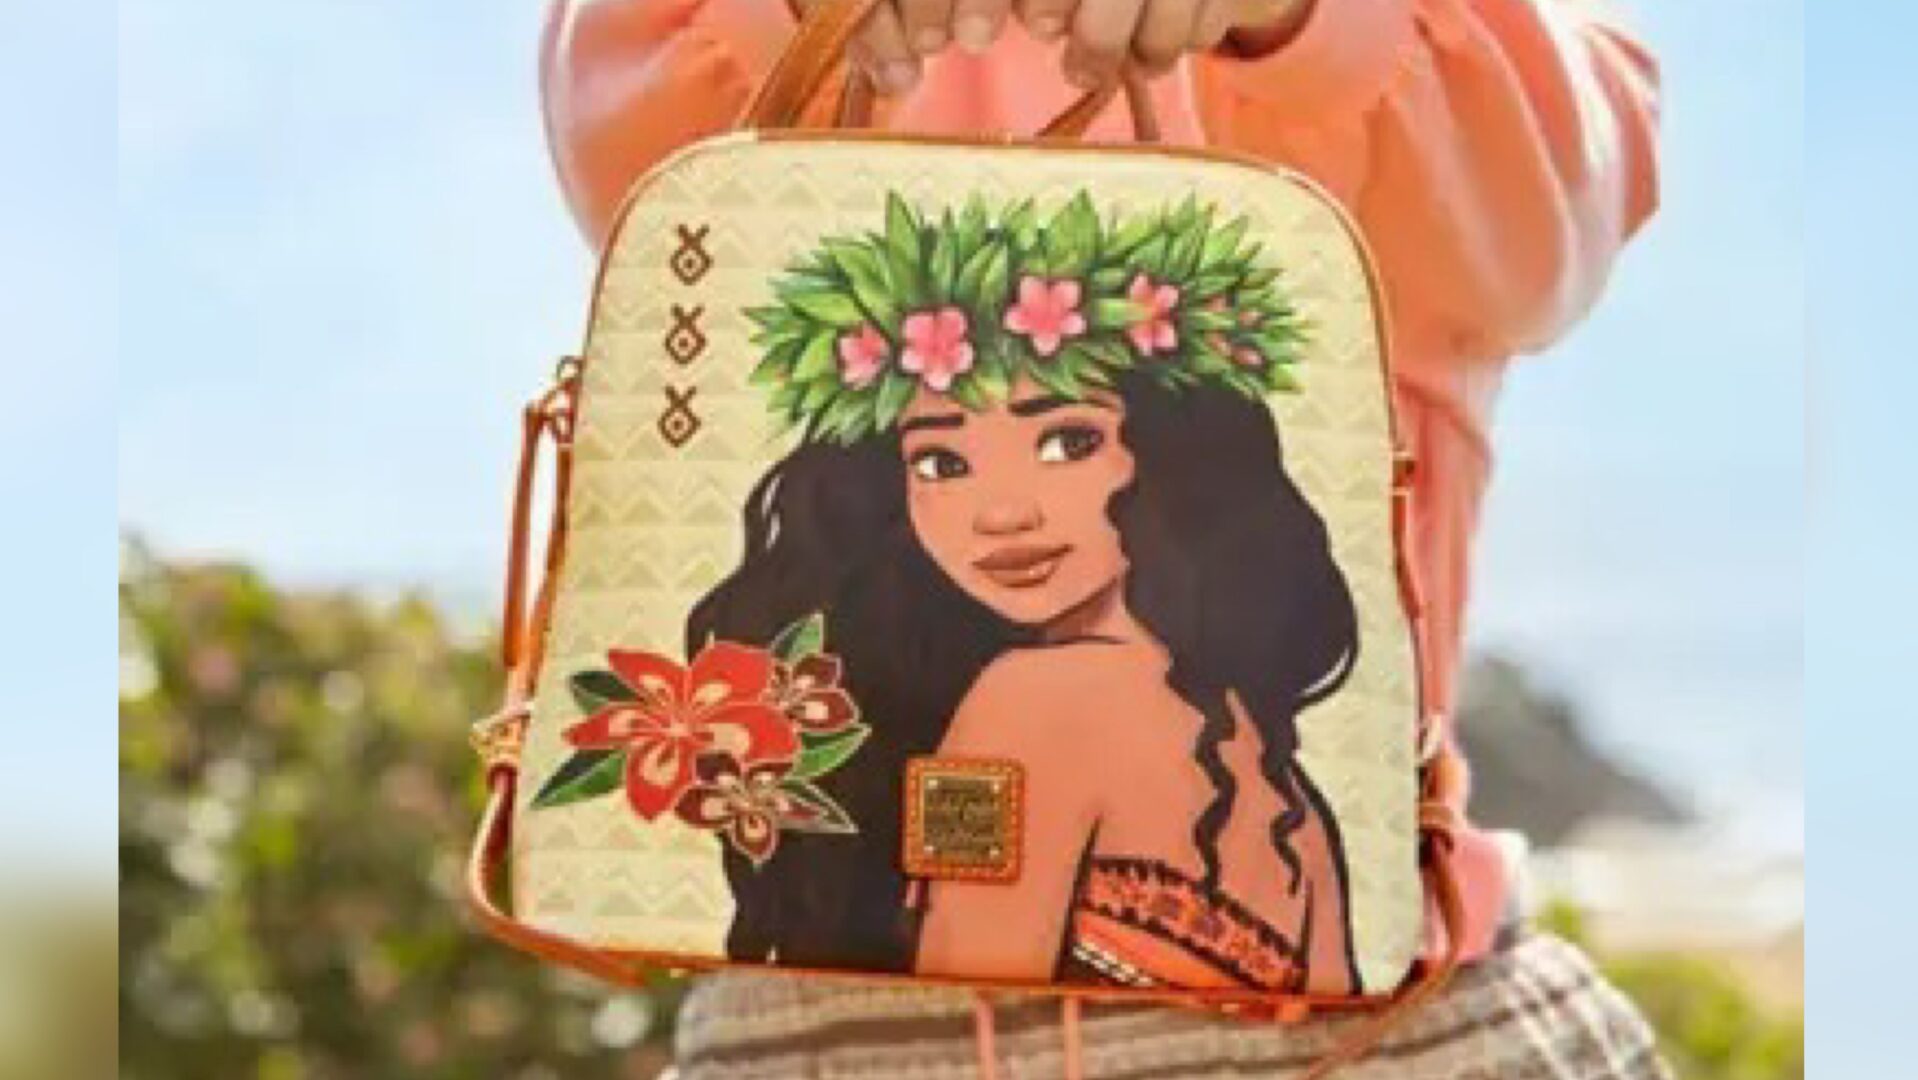 New Moana Dooney & Bourke Collection Coming Soon To shopDisney!